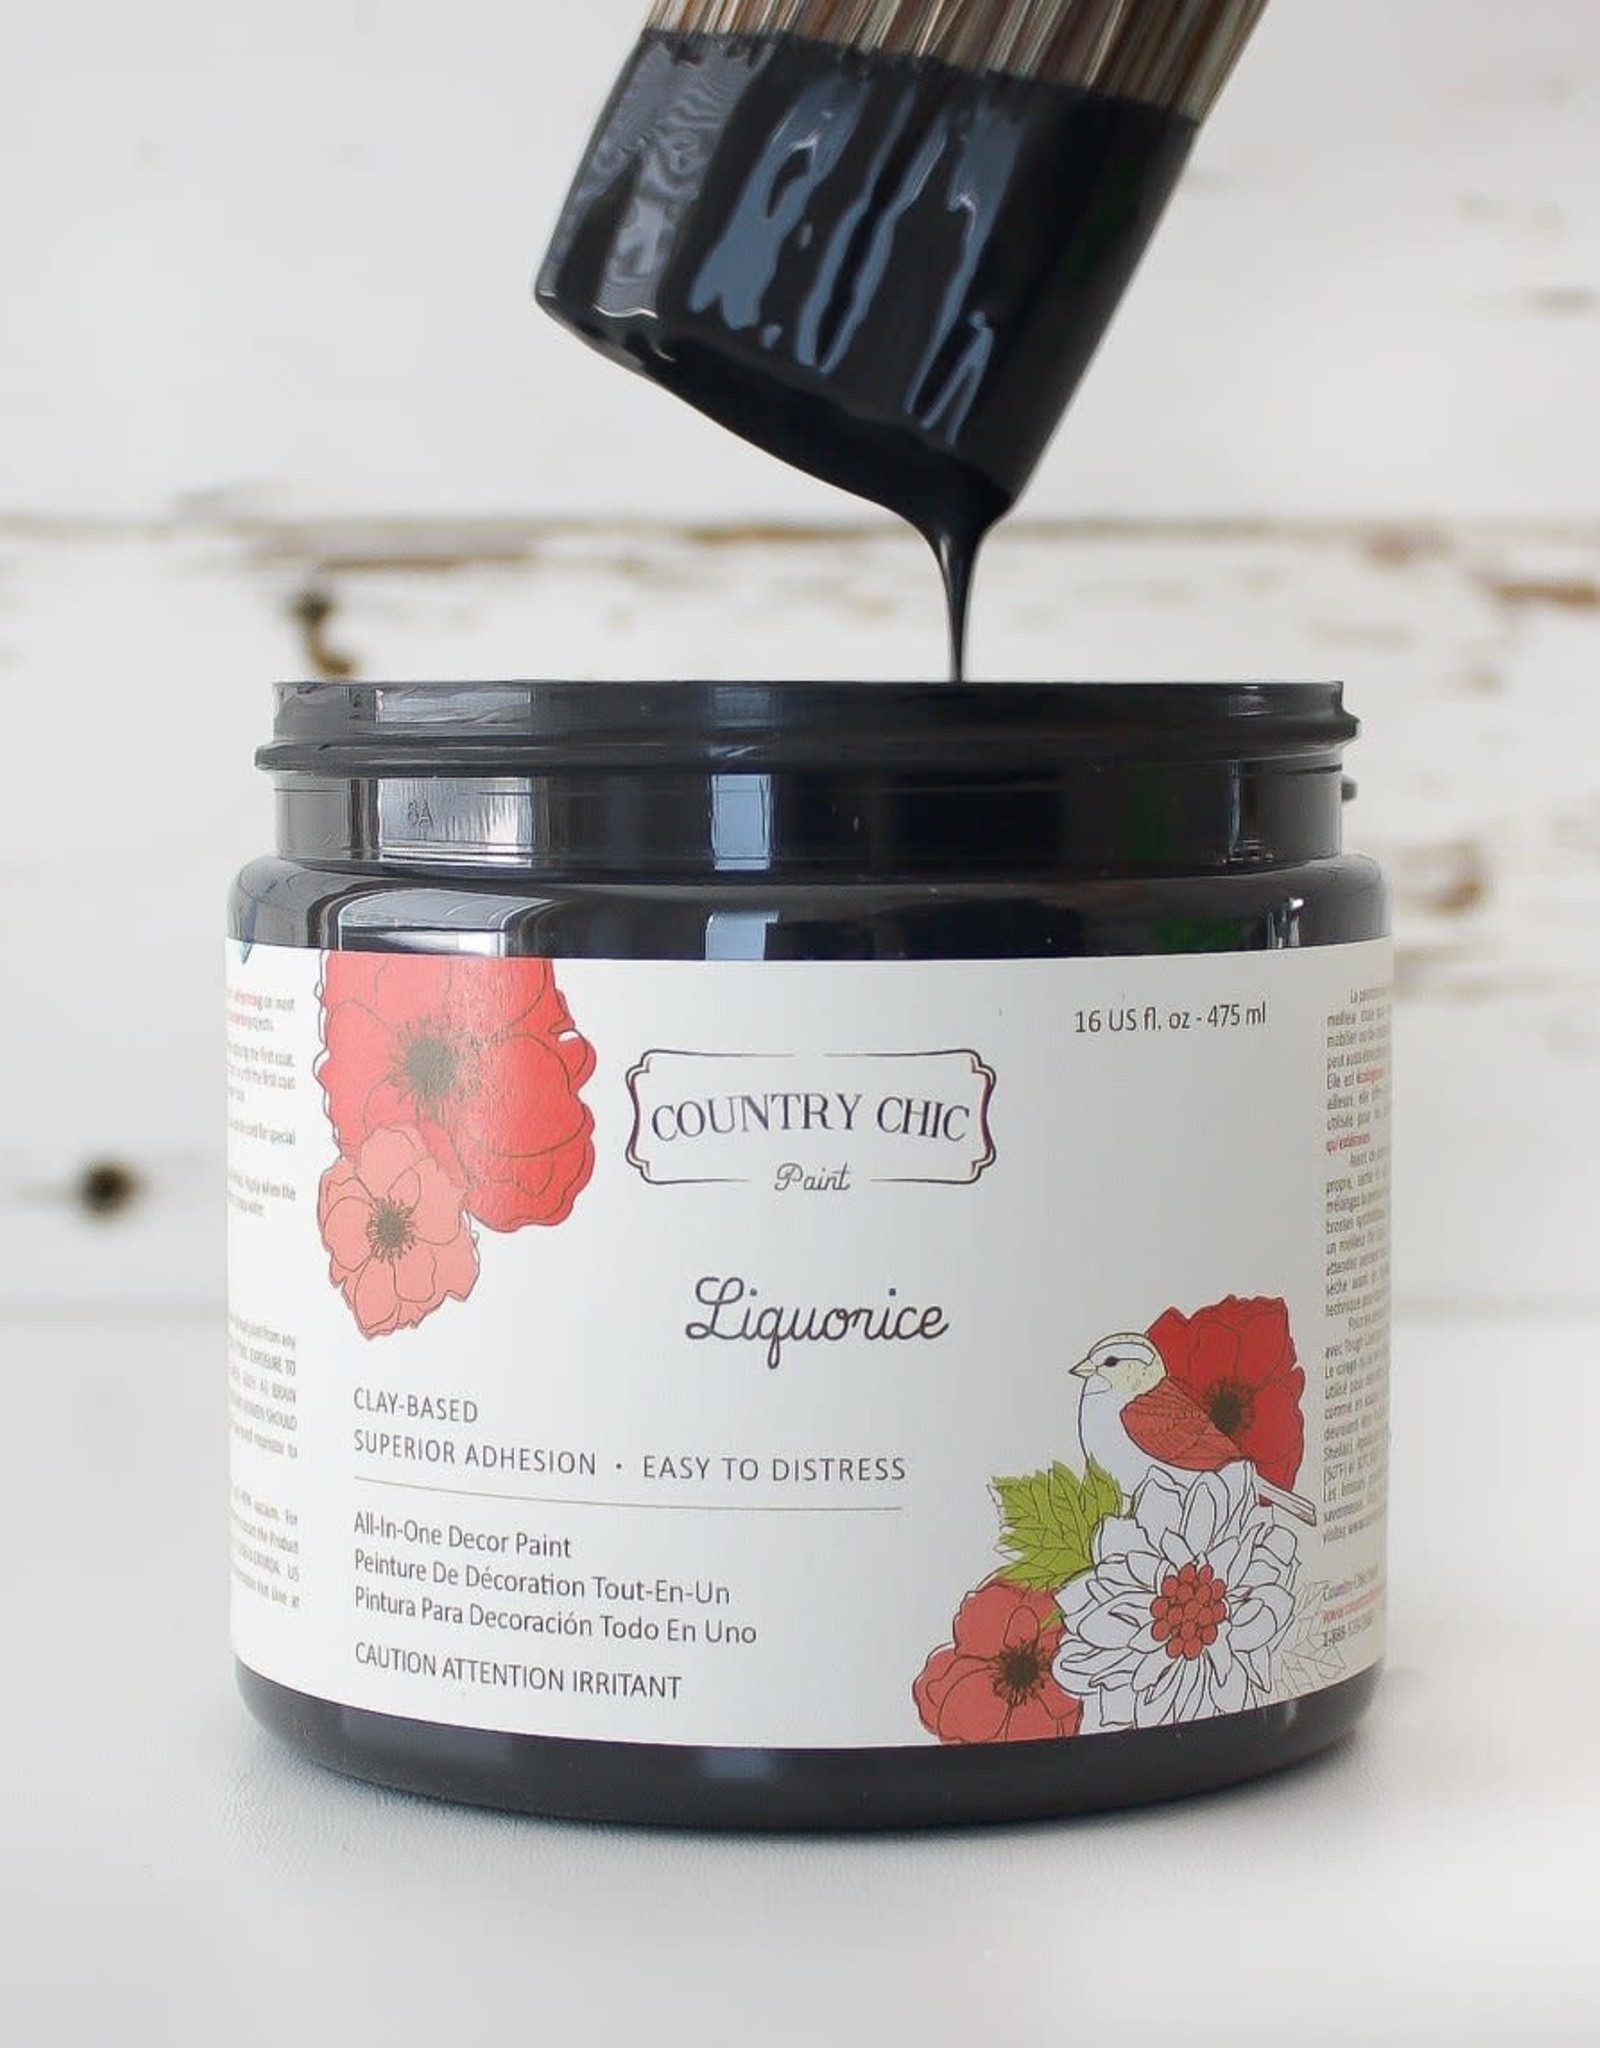 Country Chic Country Chic Paint Pint - 16oz Liquorice